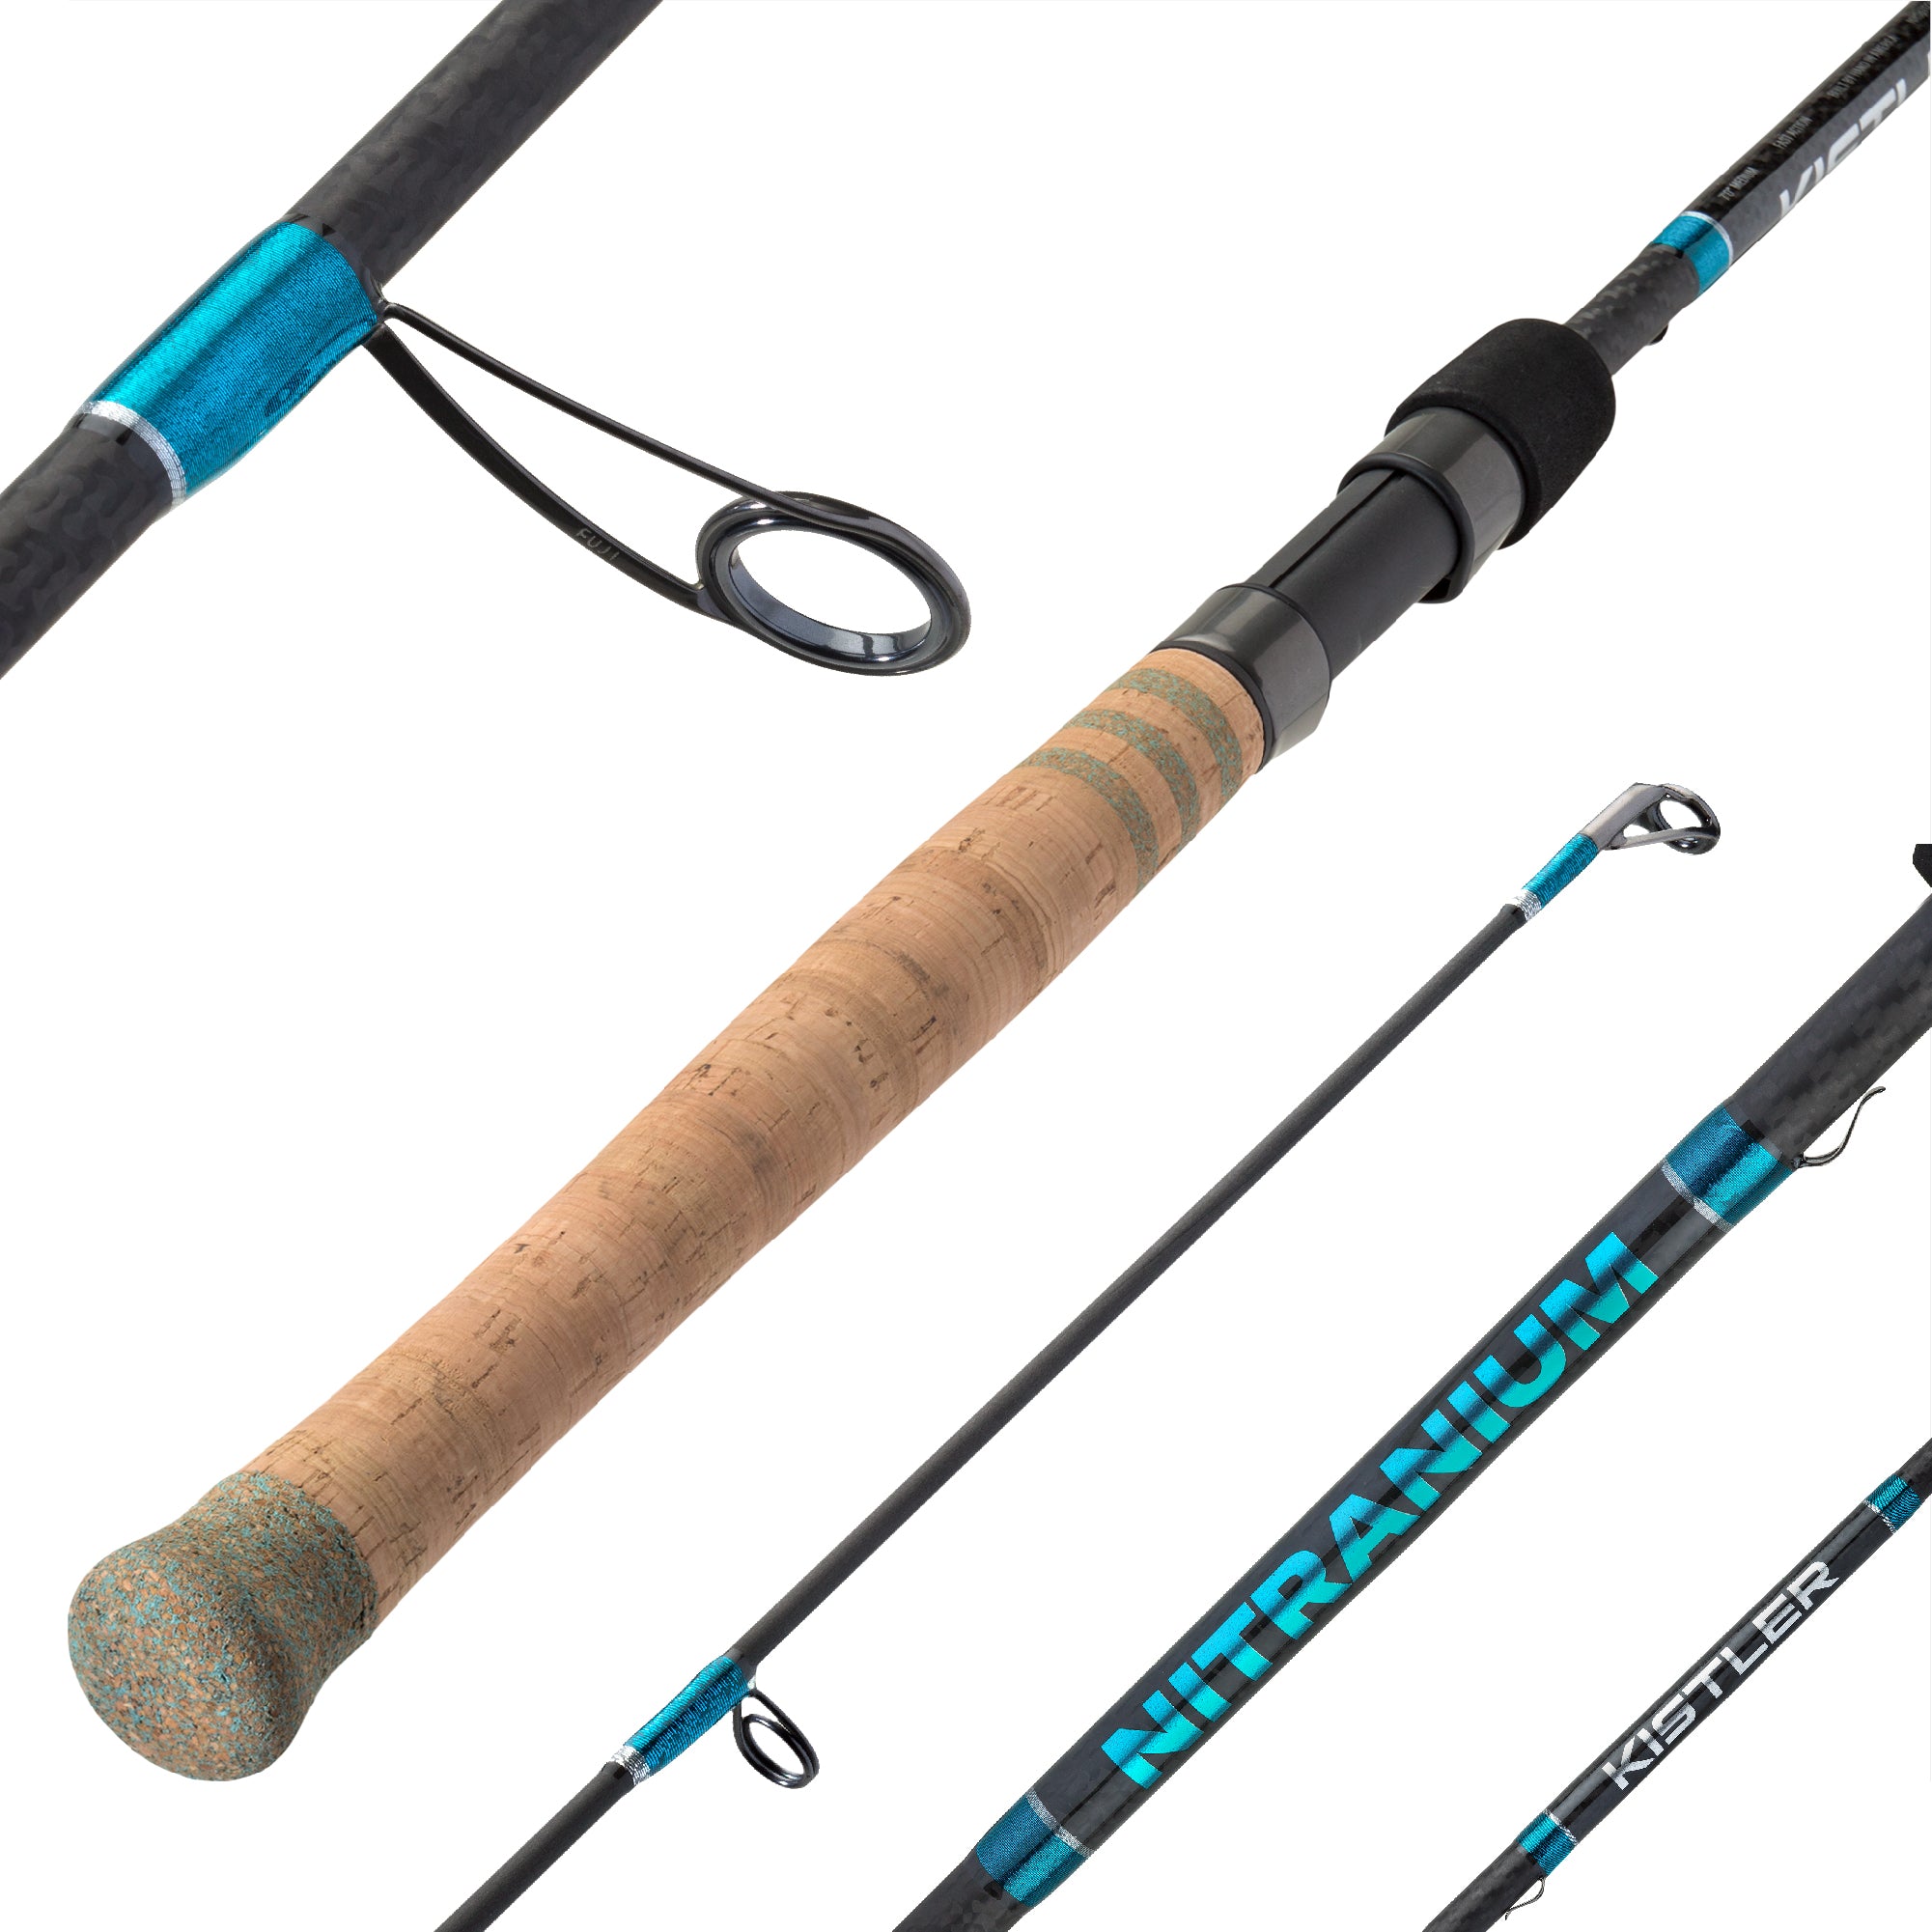 100% Carbon Fiber Spinning Fishing Rods Fast Action Fishing